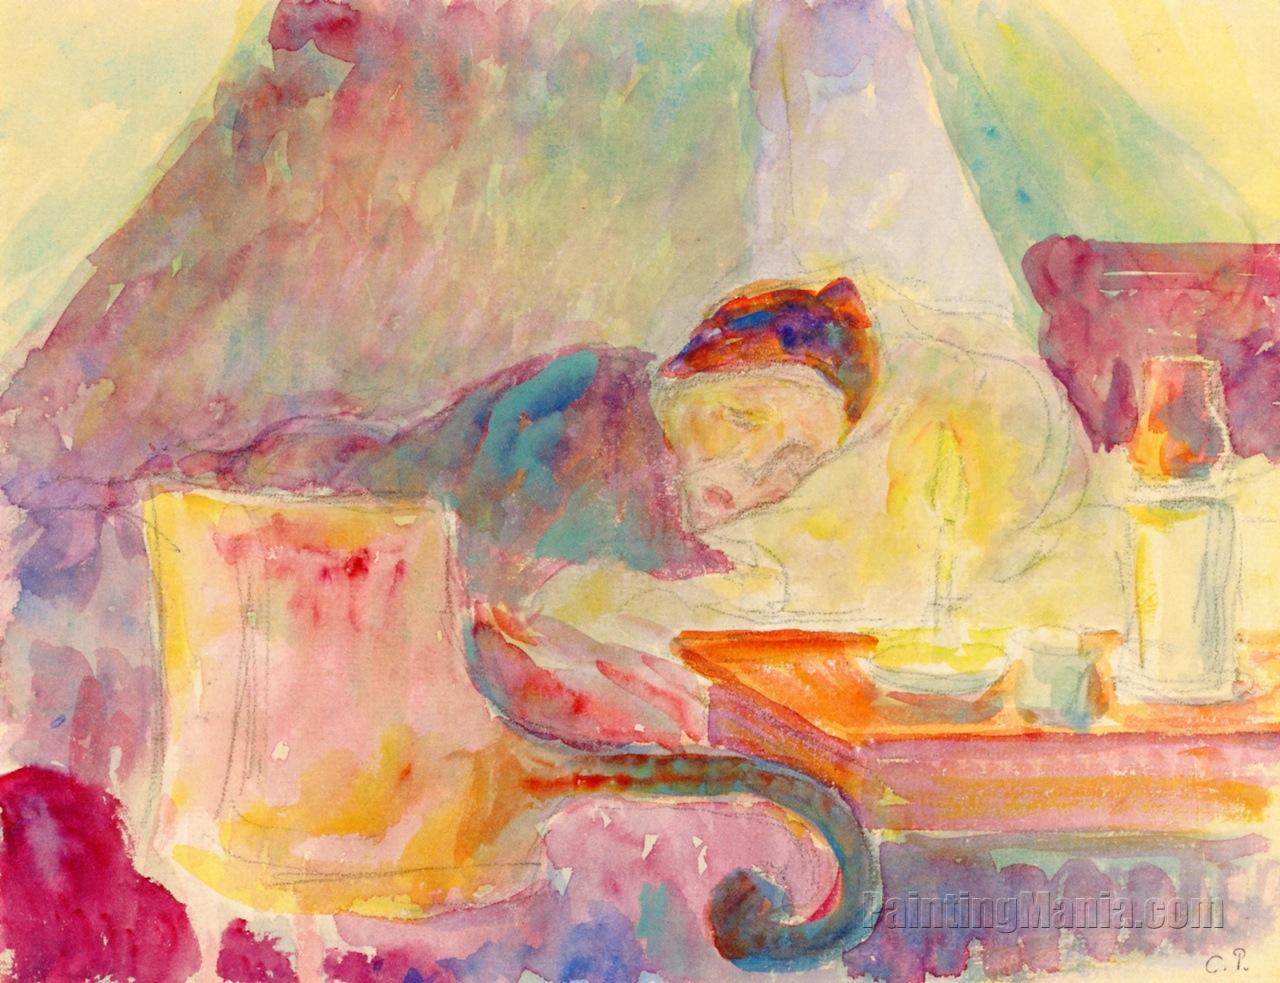 The Artist's Mother in Bed